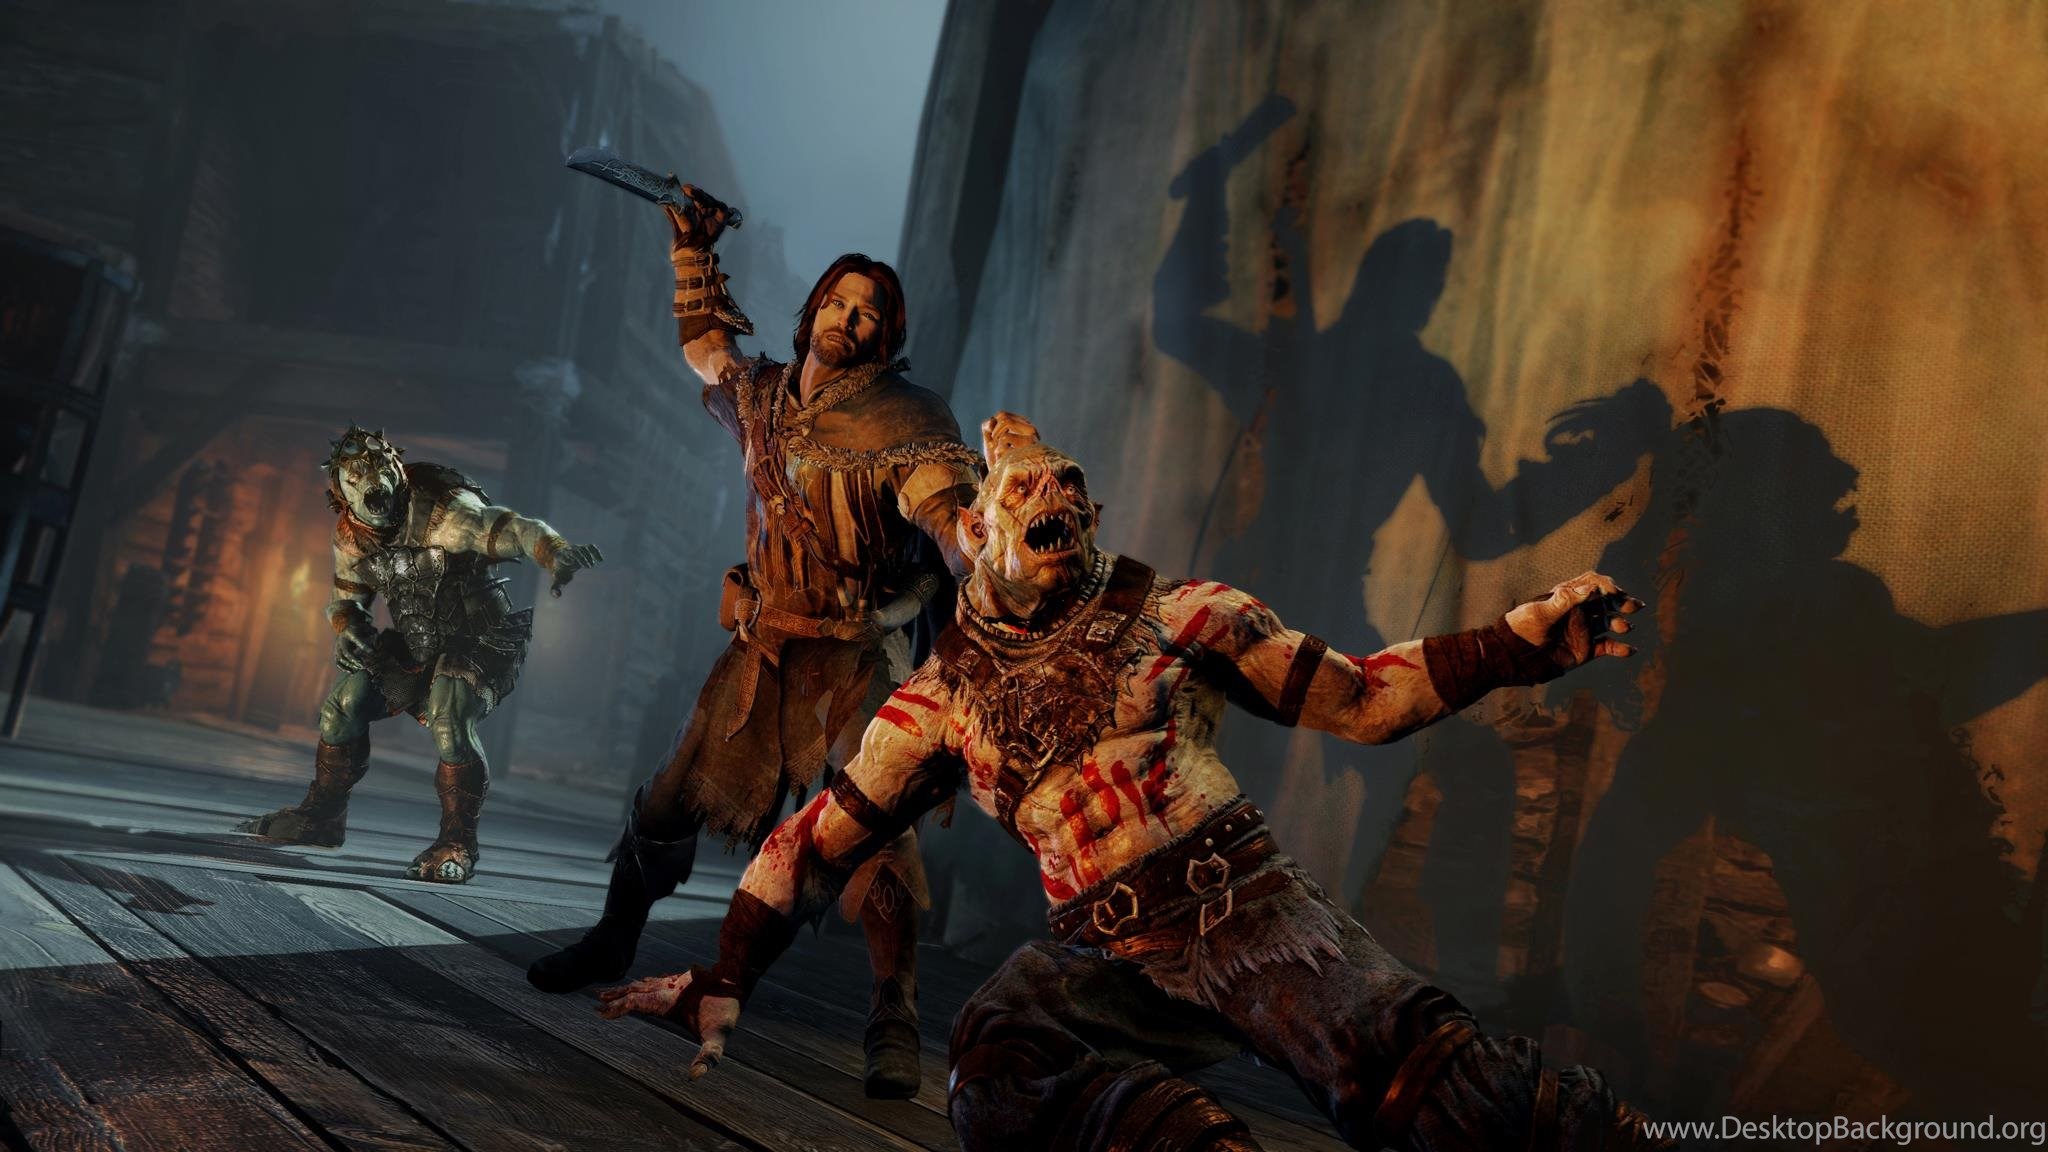 Shadow of mordor game. Middle-Earth: Shadow of Mordor. Shadow of Mordor 2 Талион. Middle Shadow of Mordor.